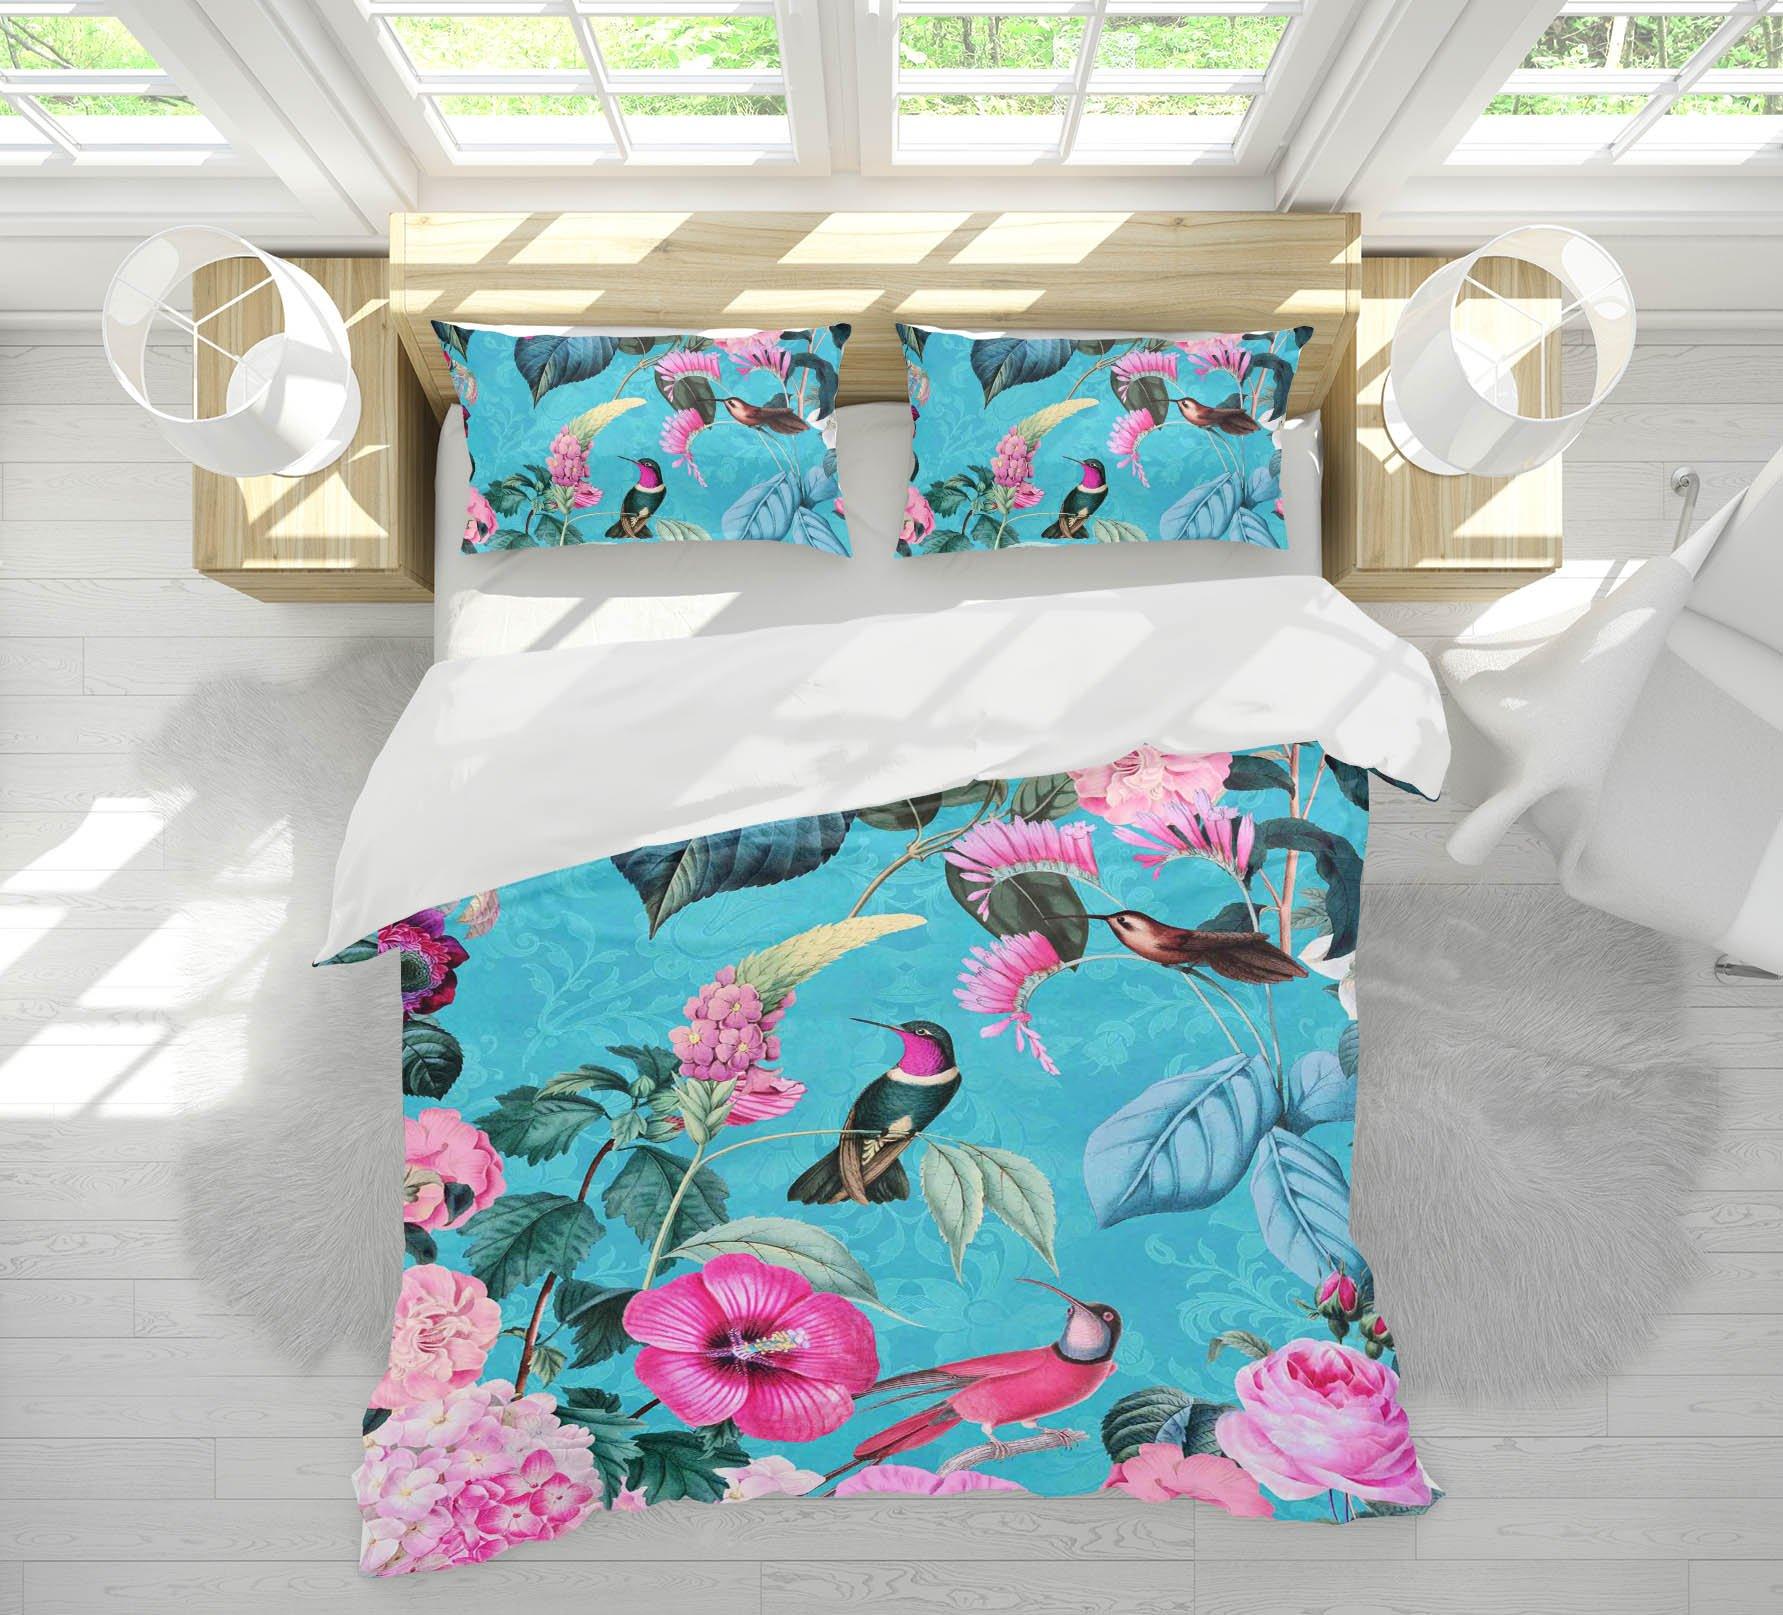 3D Bird Flowers 2119 Andrea haase Bedding Bed Pillowcases Quilt Quiet Covers AJ Creativity Home 